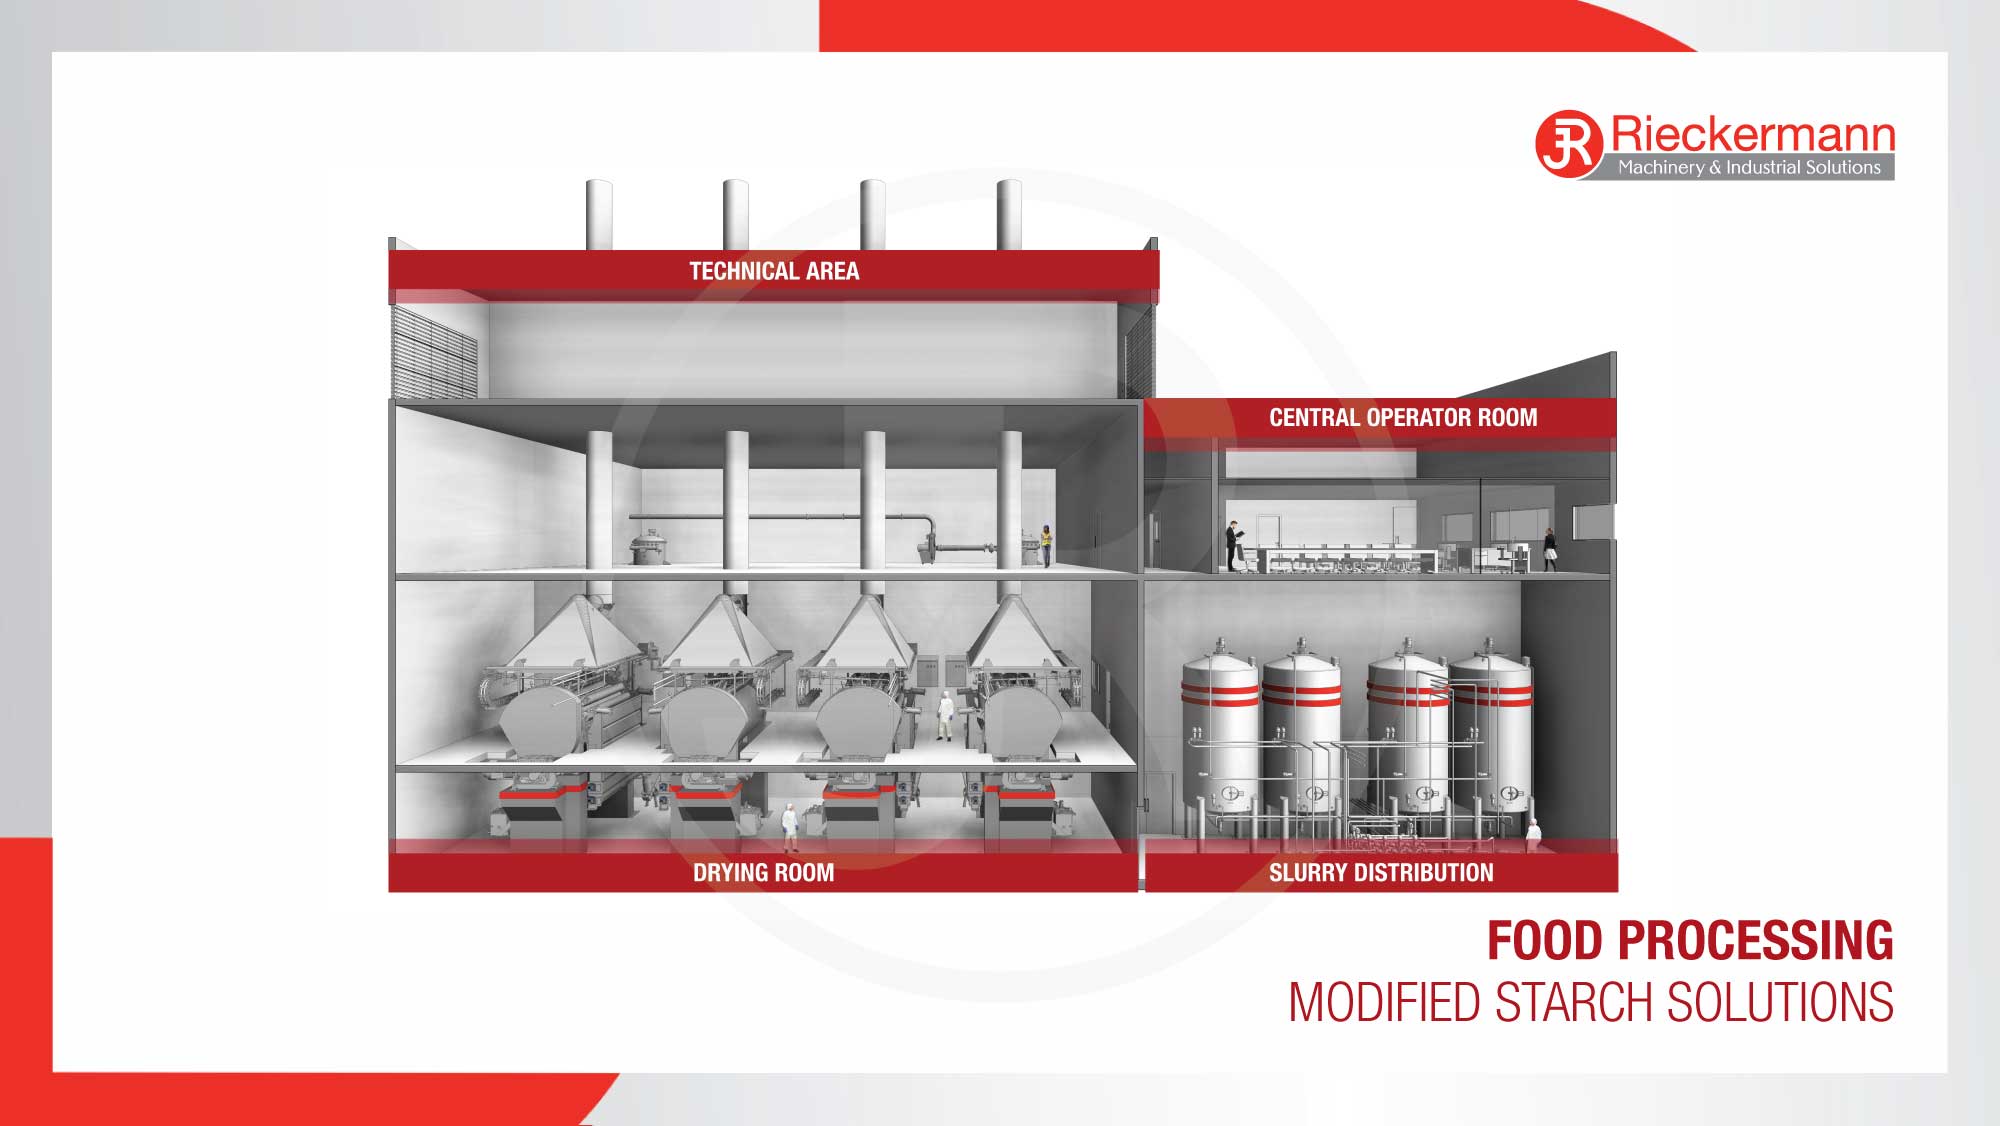 Food Processing - Modified Starch Solutions